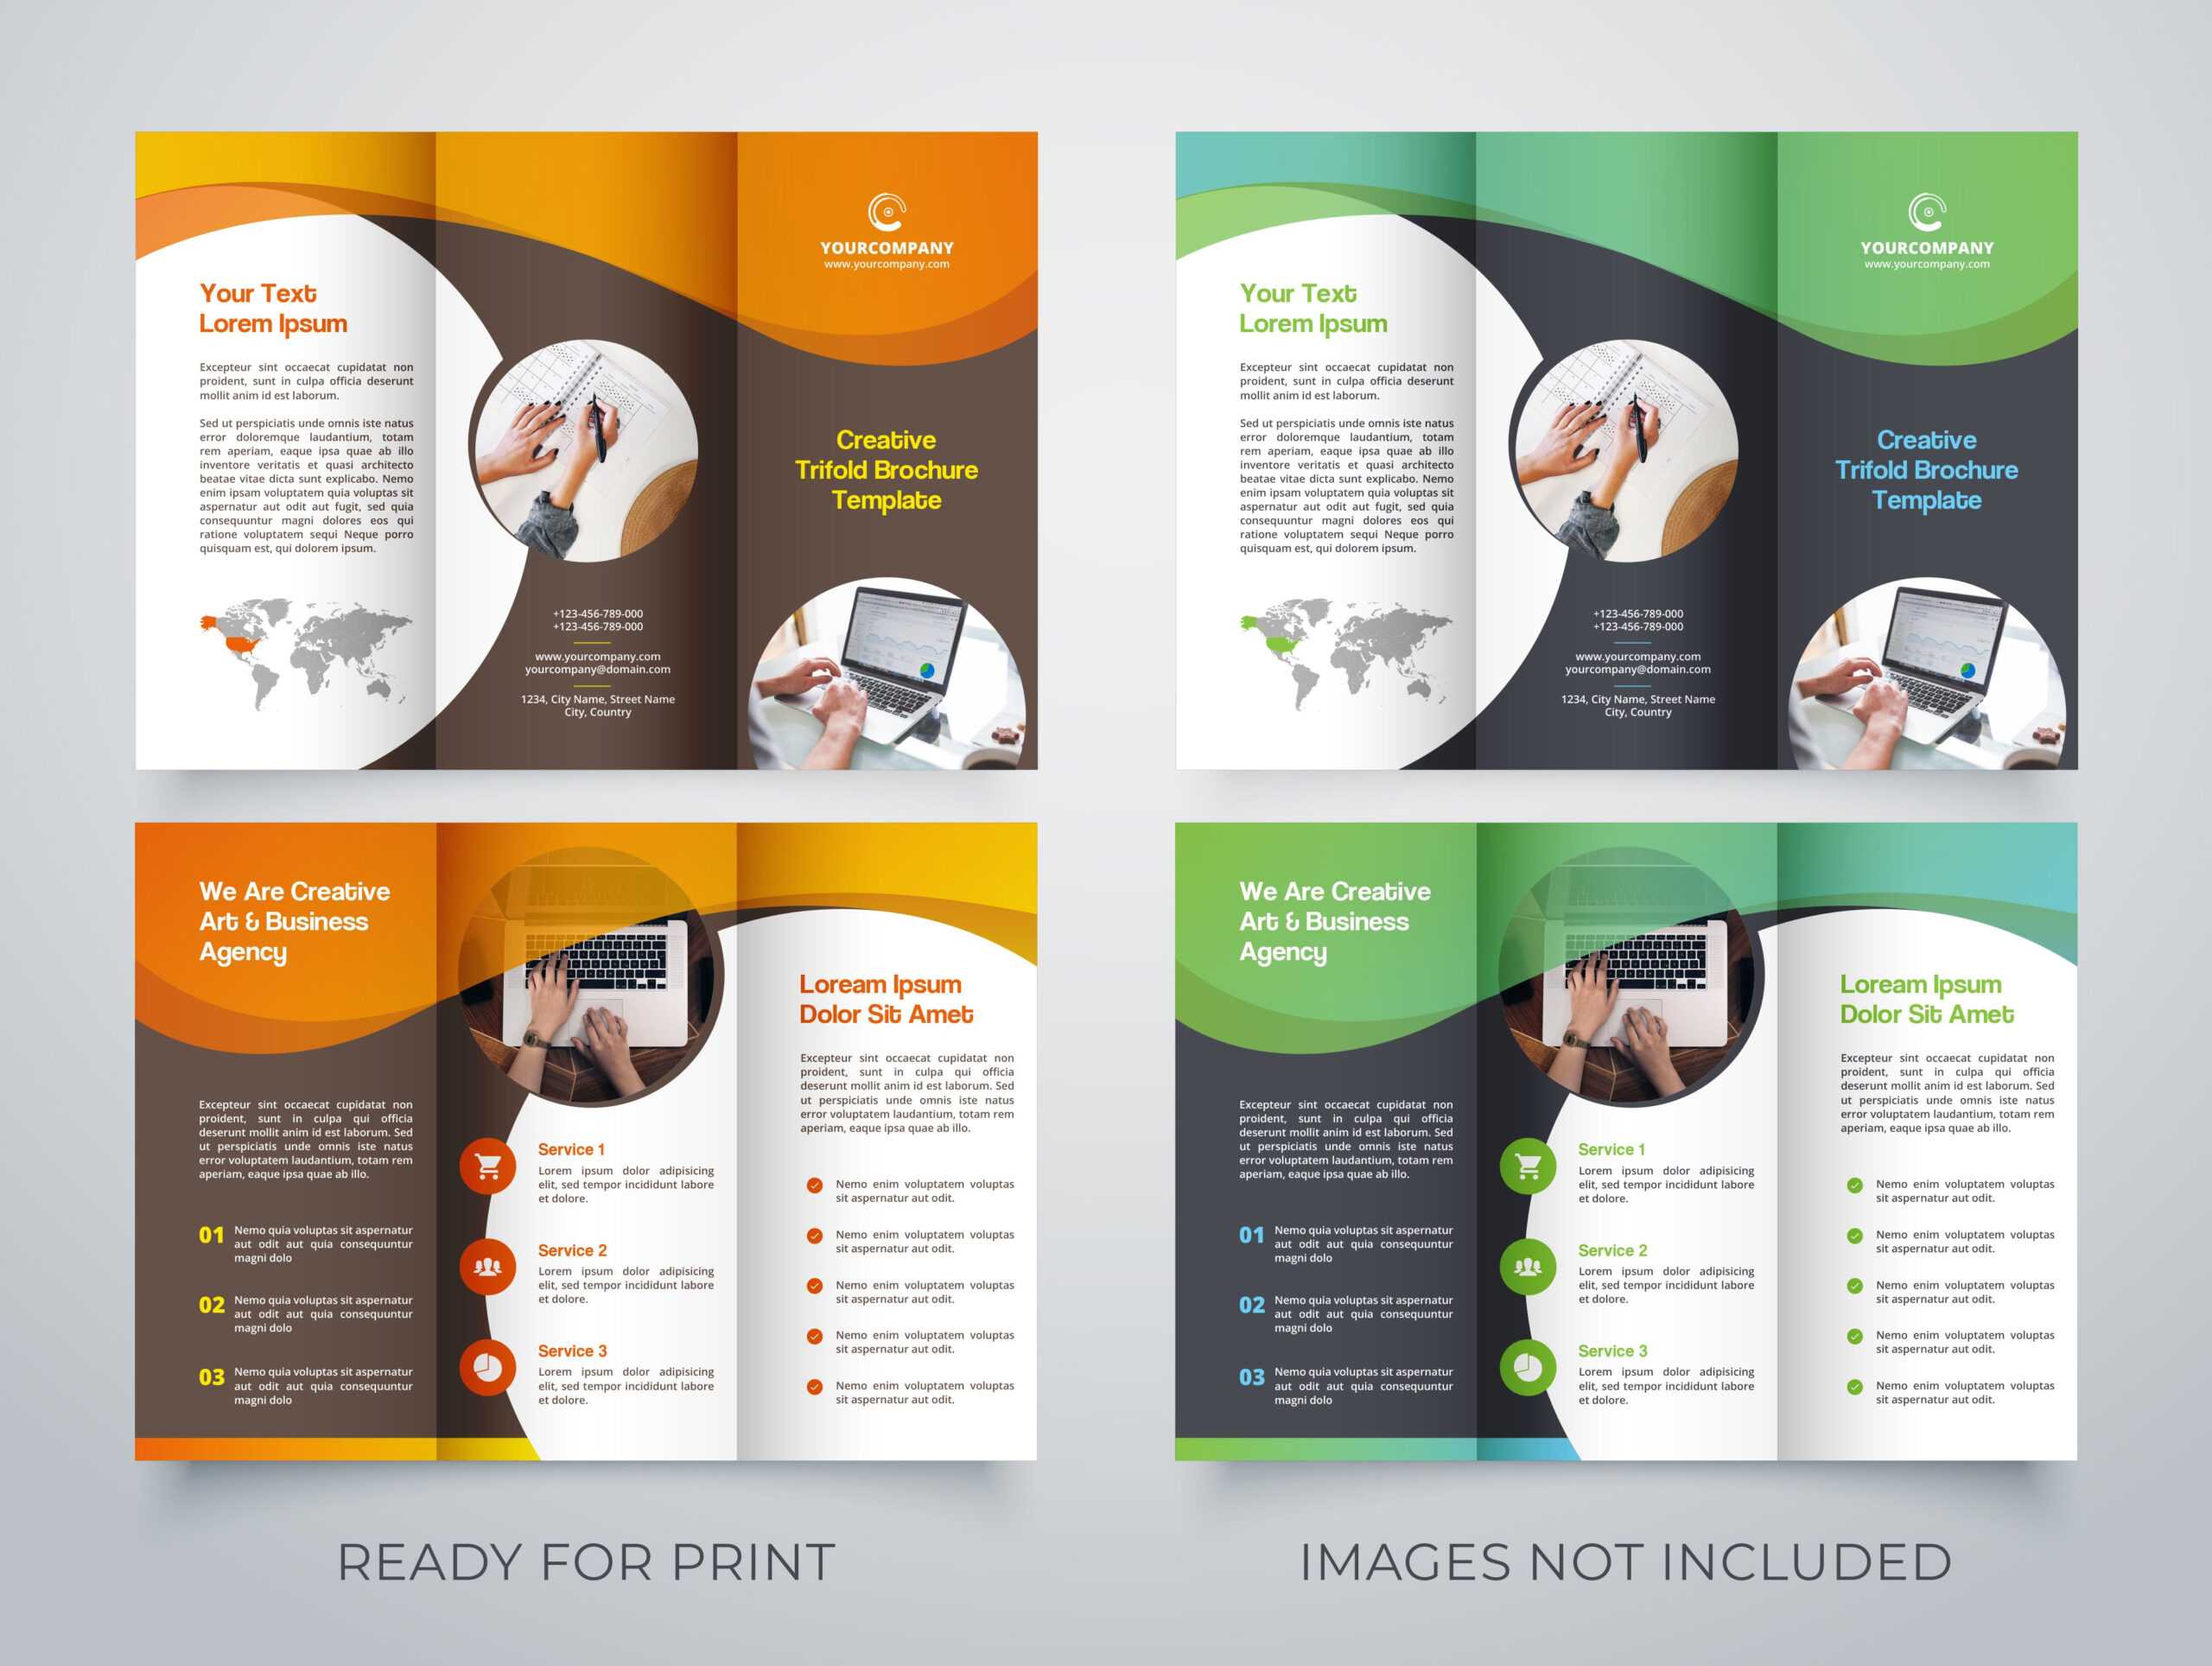 Creative Trifold Brochure Template. 2 Color Styles №80614 With Membership Brochure Template